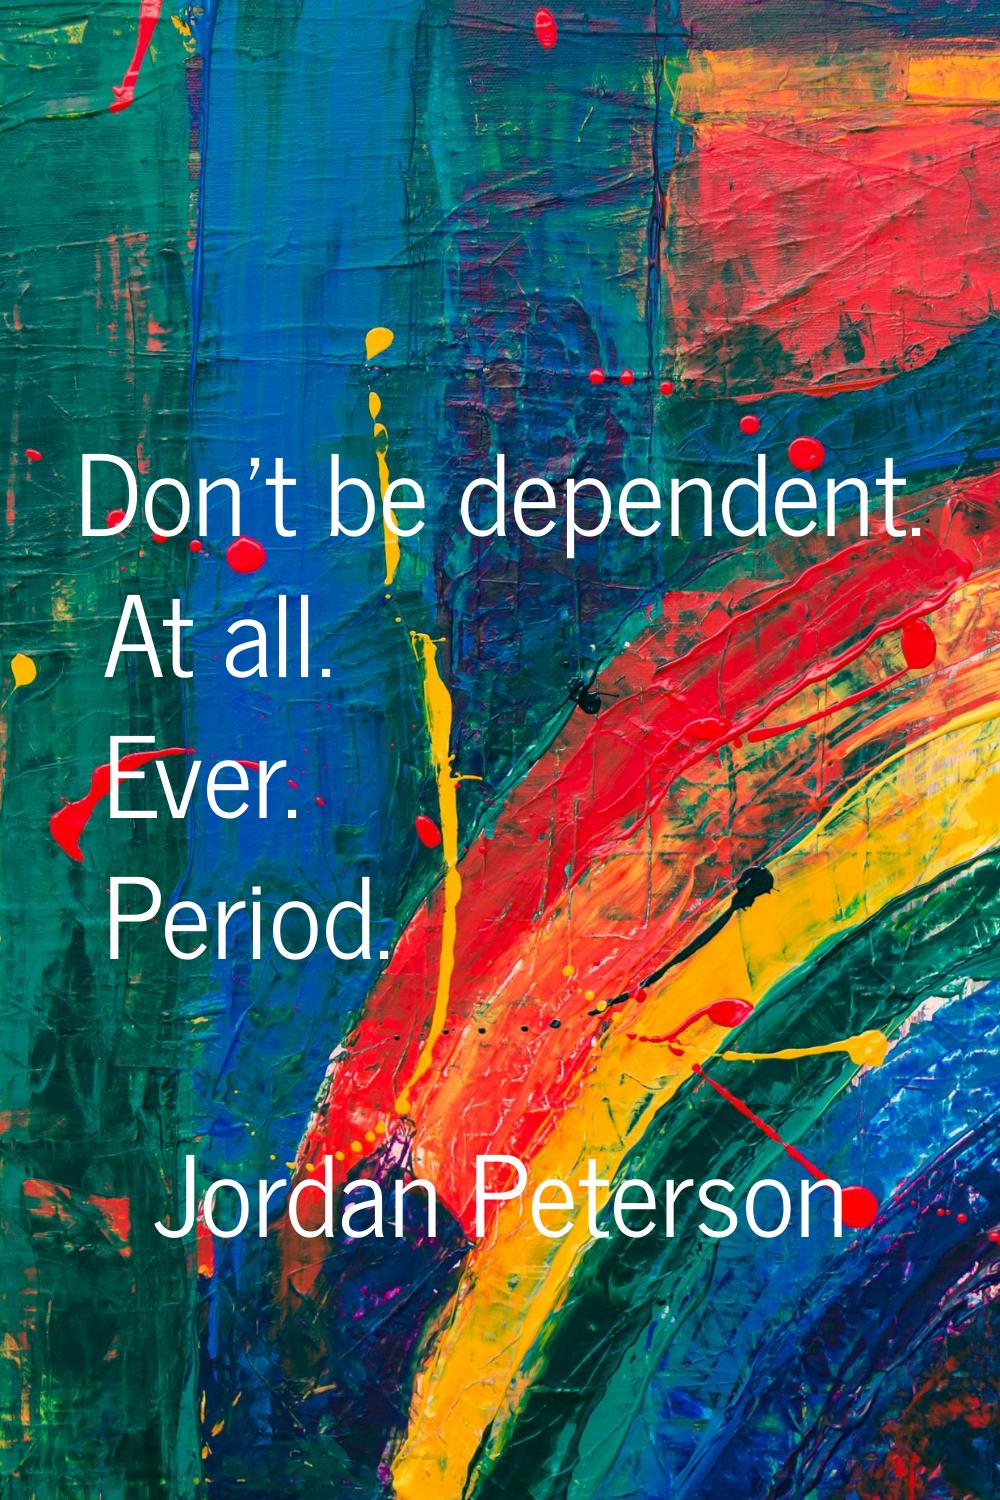 Don't be dependent. At all. Ever. Period.